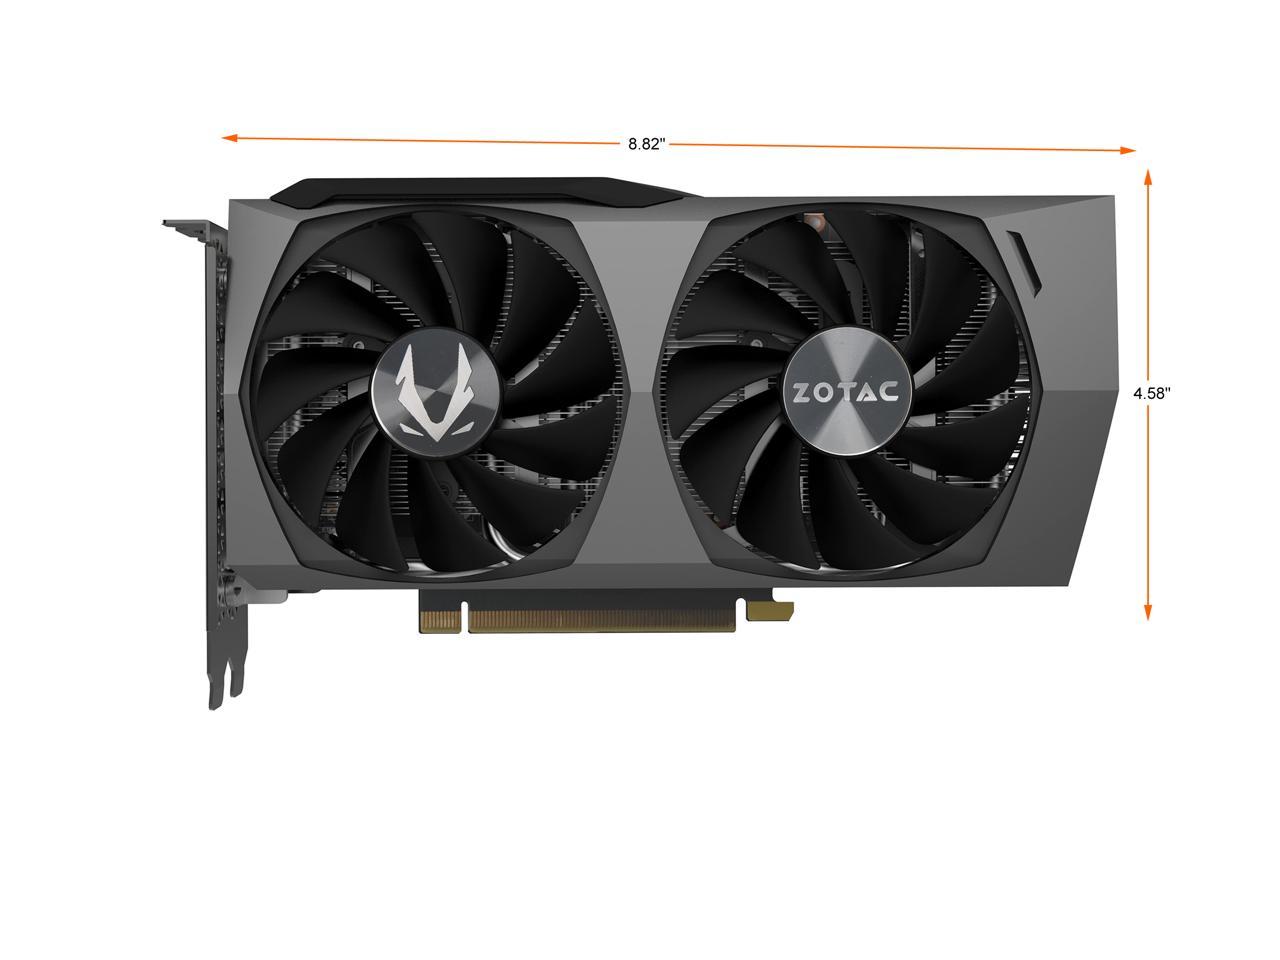 ZOTAC GAMING GeForce RTX 3060 Twin Edge OC 12GB GDDR6 192-bit 15 Gbps PCIE  4.0 Gaming Graphics Card, IceStorm 2.0 Cooling, Active Fan Control, FREEZE  